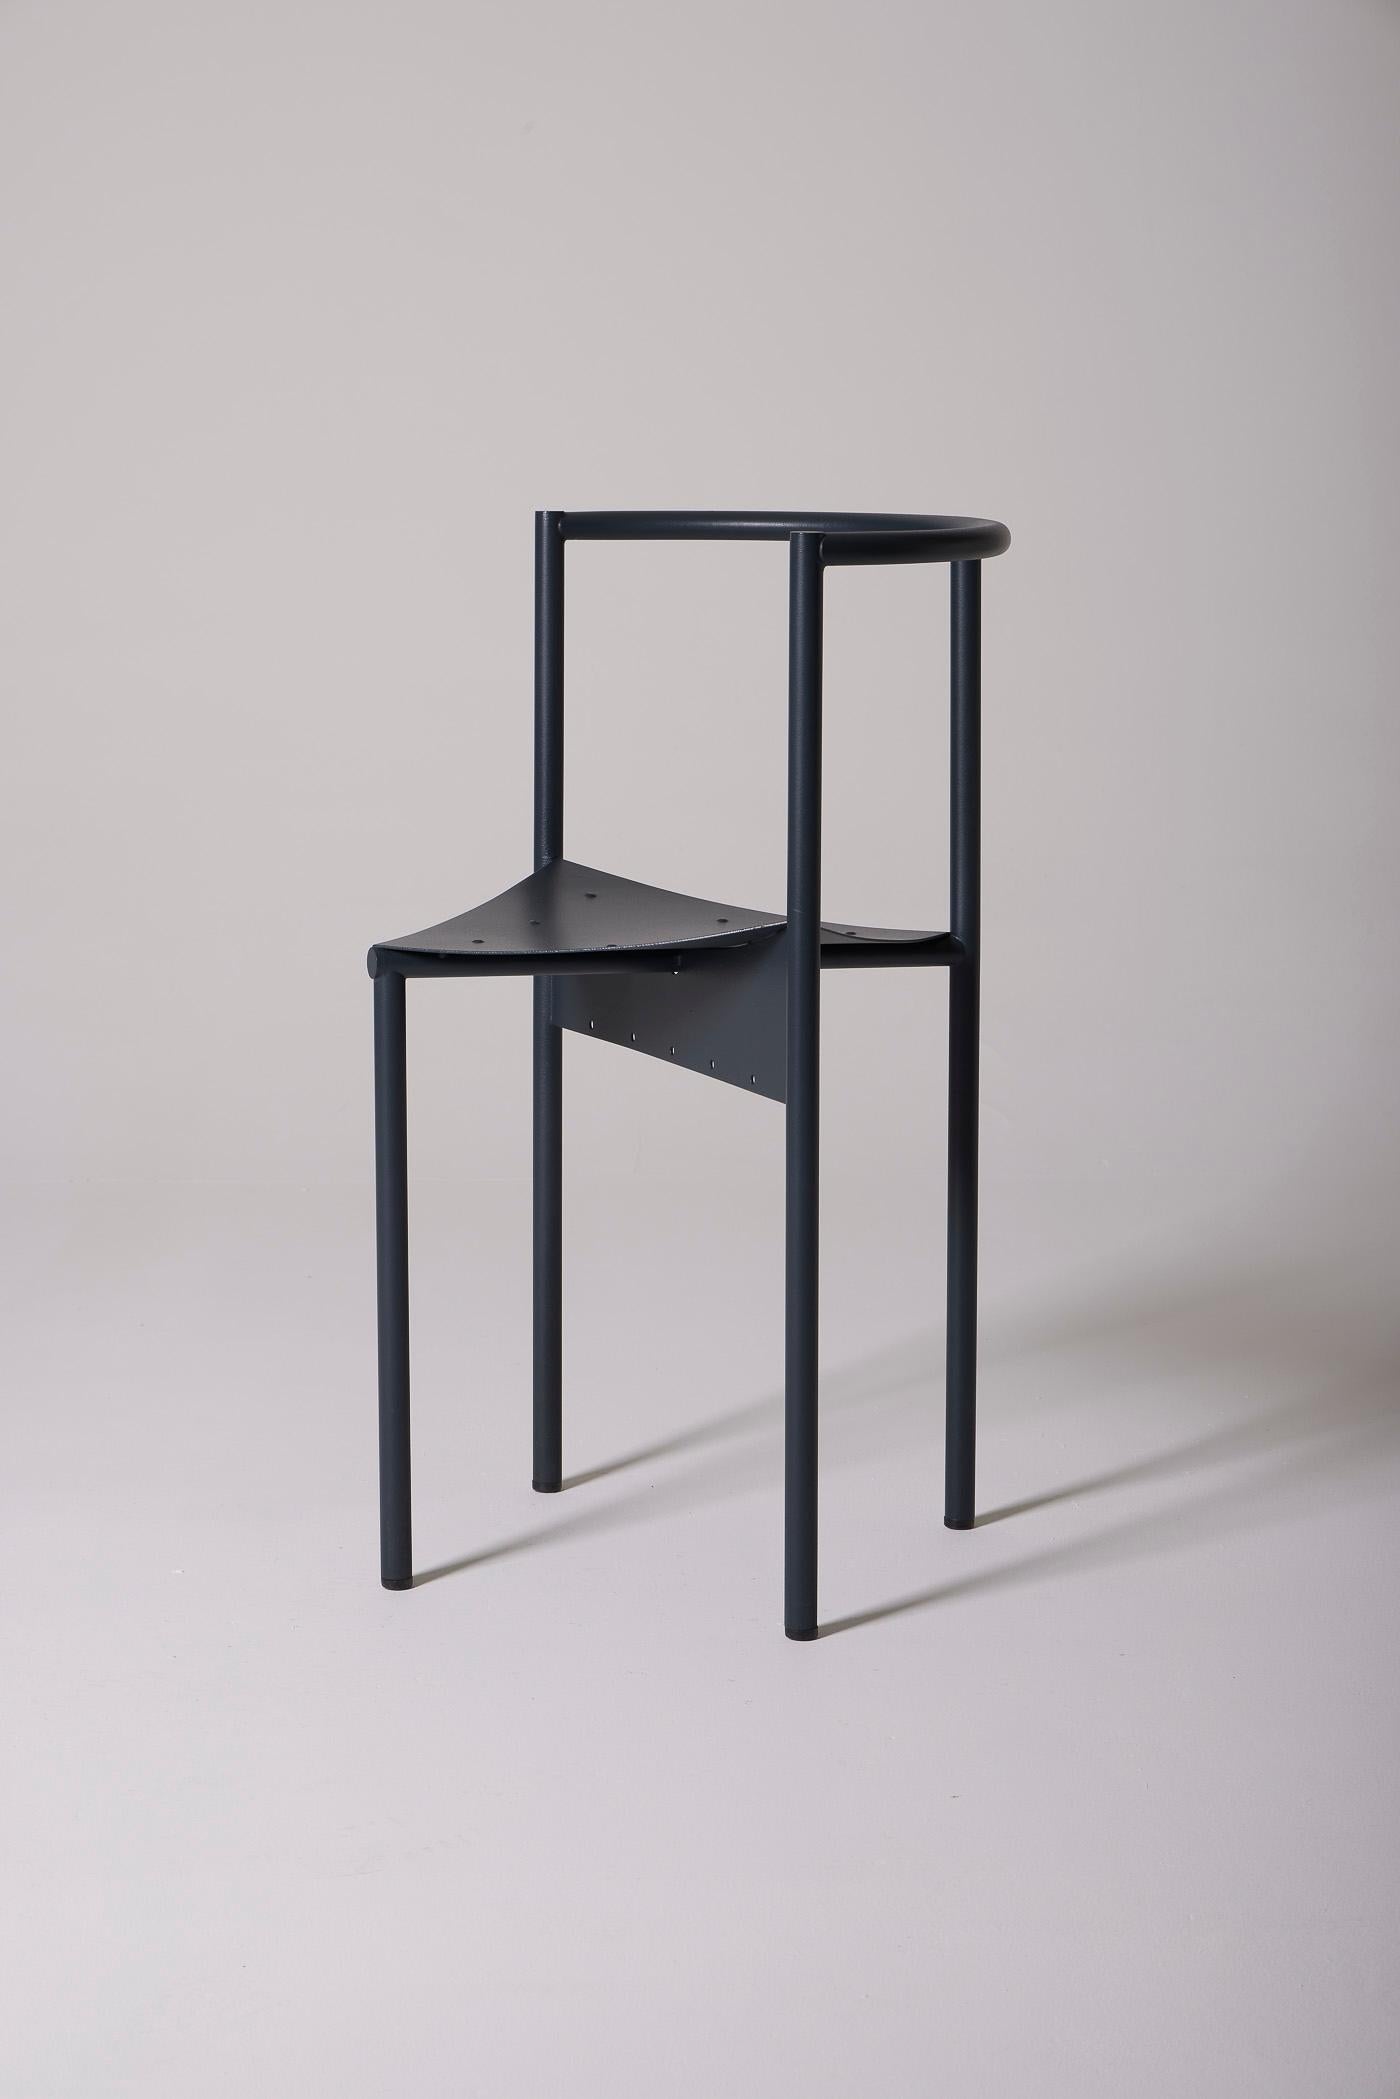 Chair model Wendy Wright by French designer Philippe Starck for Disform, from the 1980s. It is in gray anodized metal. In very good condition.
DV517